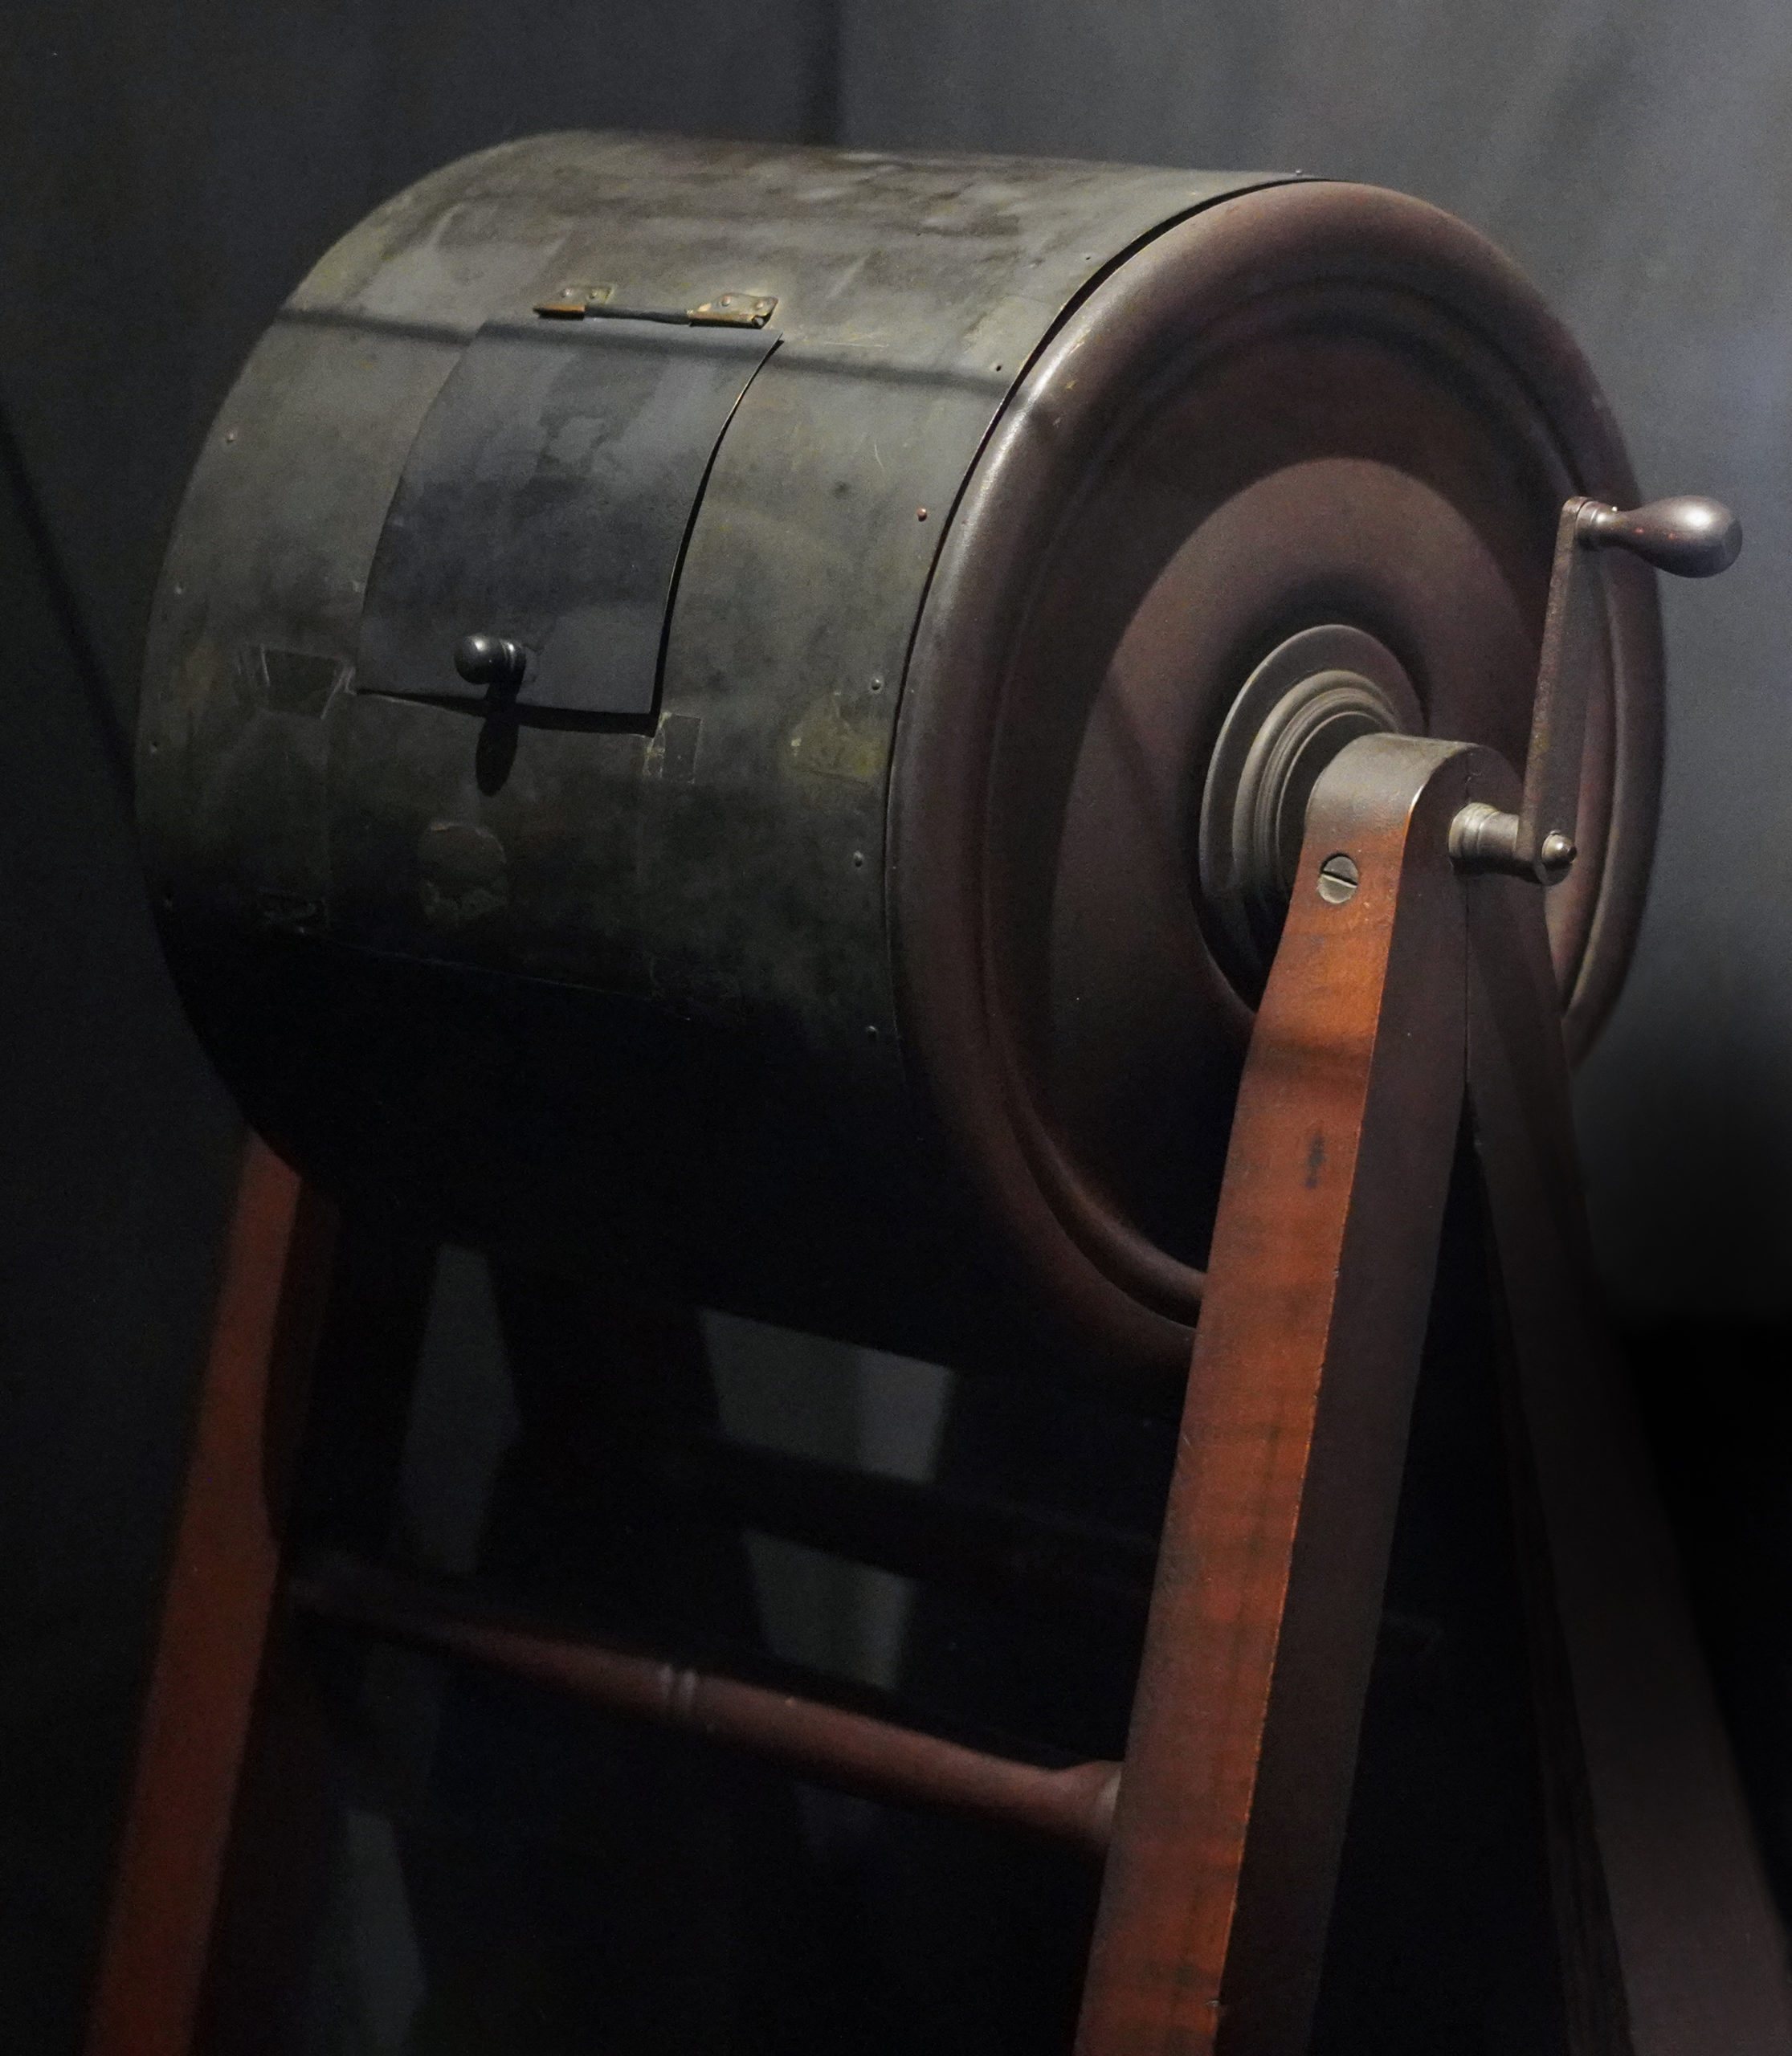 Draft cylinder, c. 1863 used to draw names of men aged 20 – 45 until a communities’ quota was reached per the 1863 Enrollment Act (photo: Steven Zucker, CC BY-NC-SA 2.0)